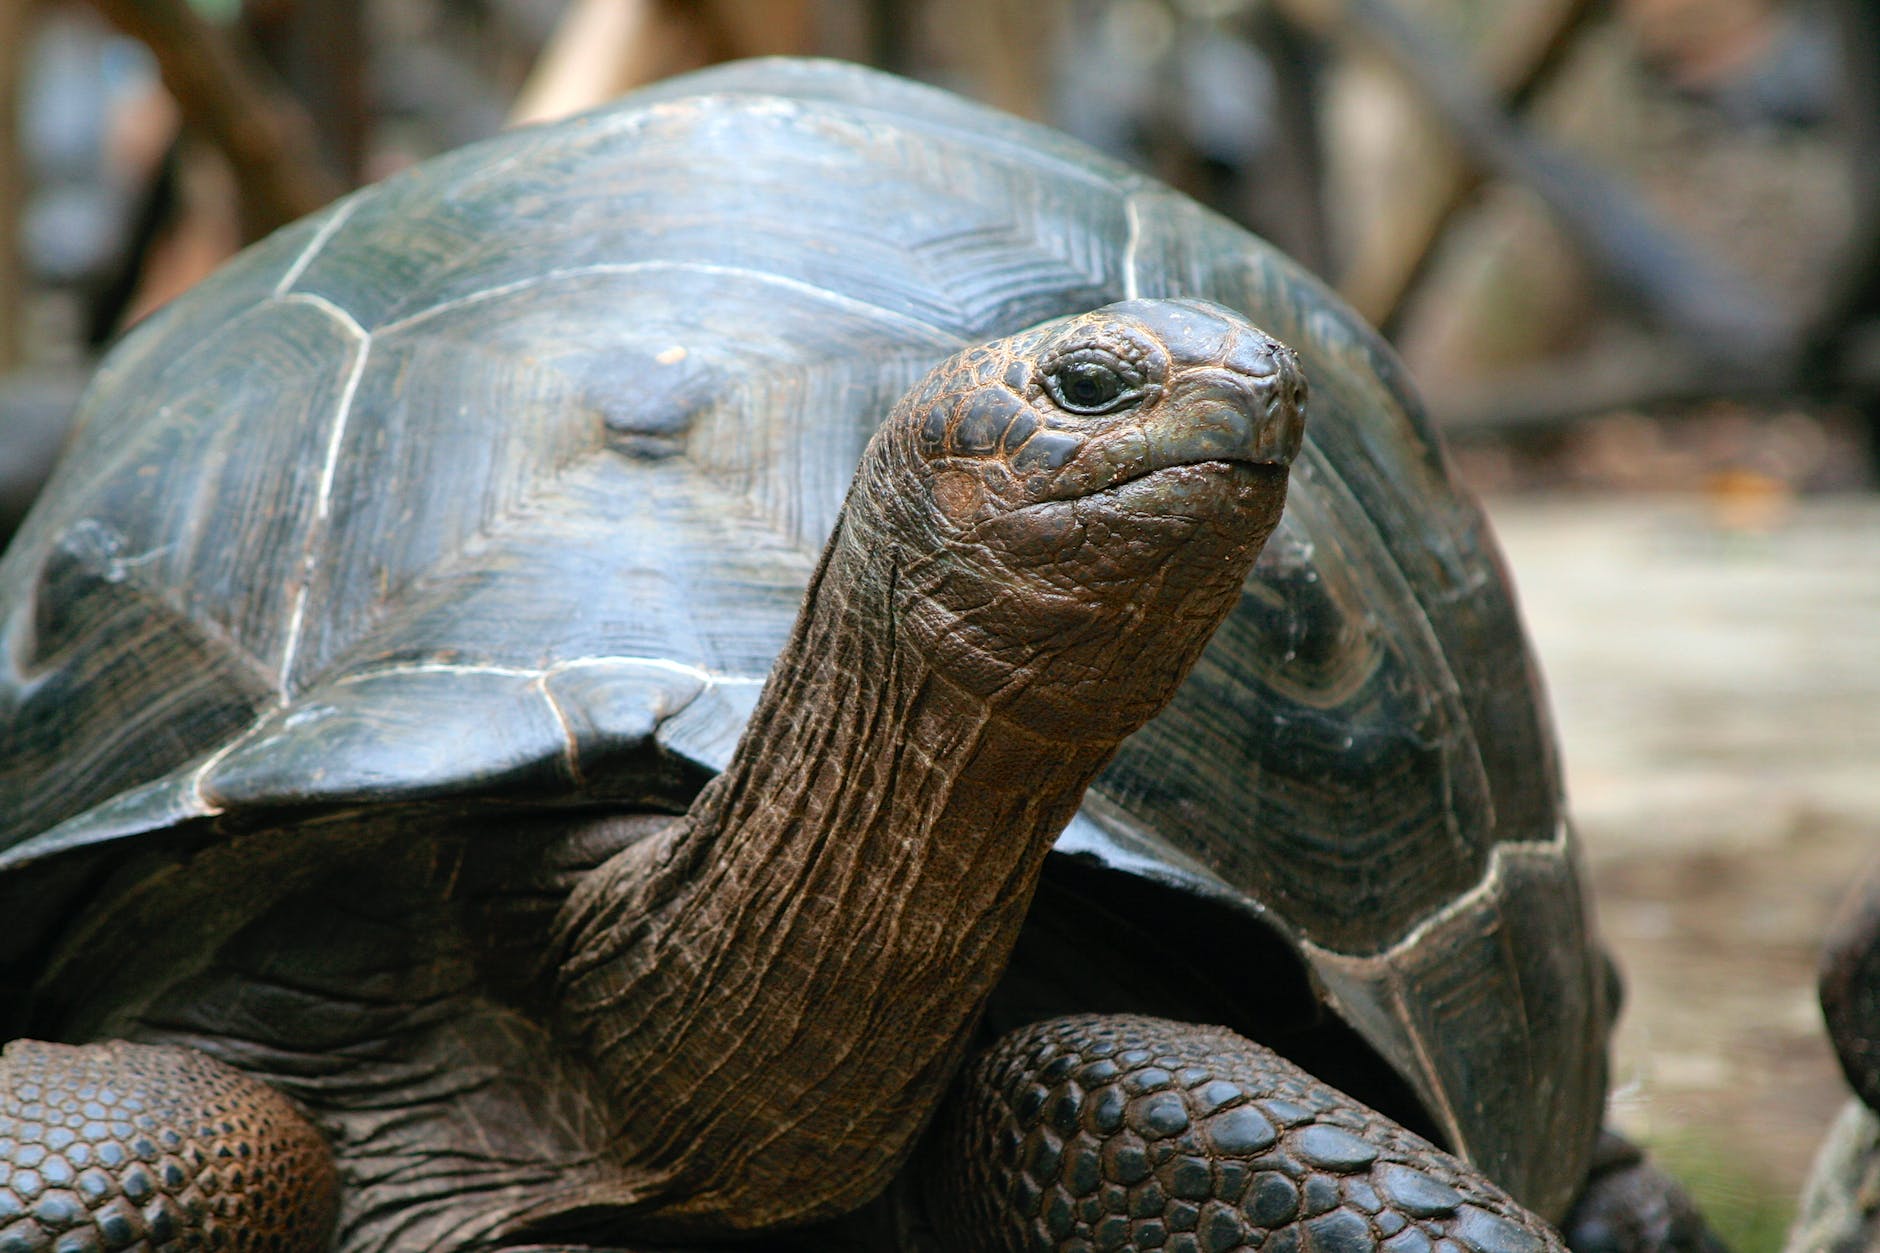 a close up shot of a galapagos giant tortoise